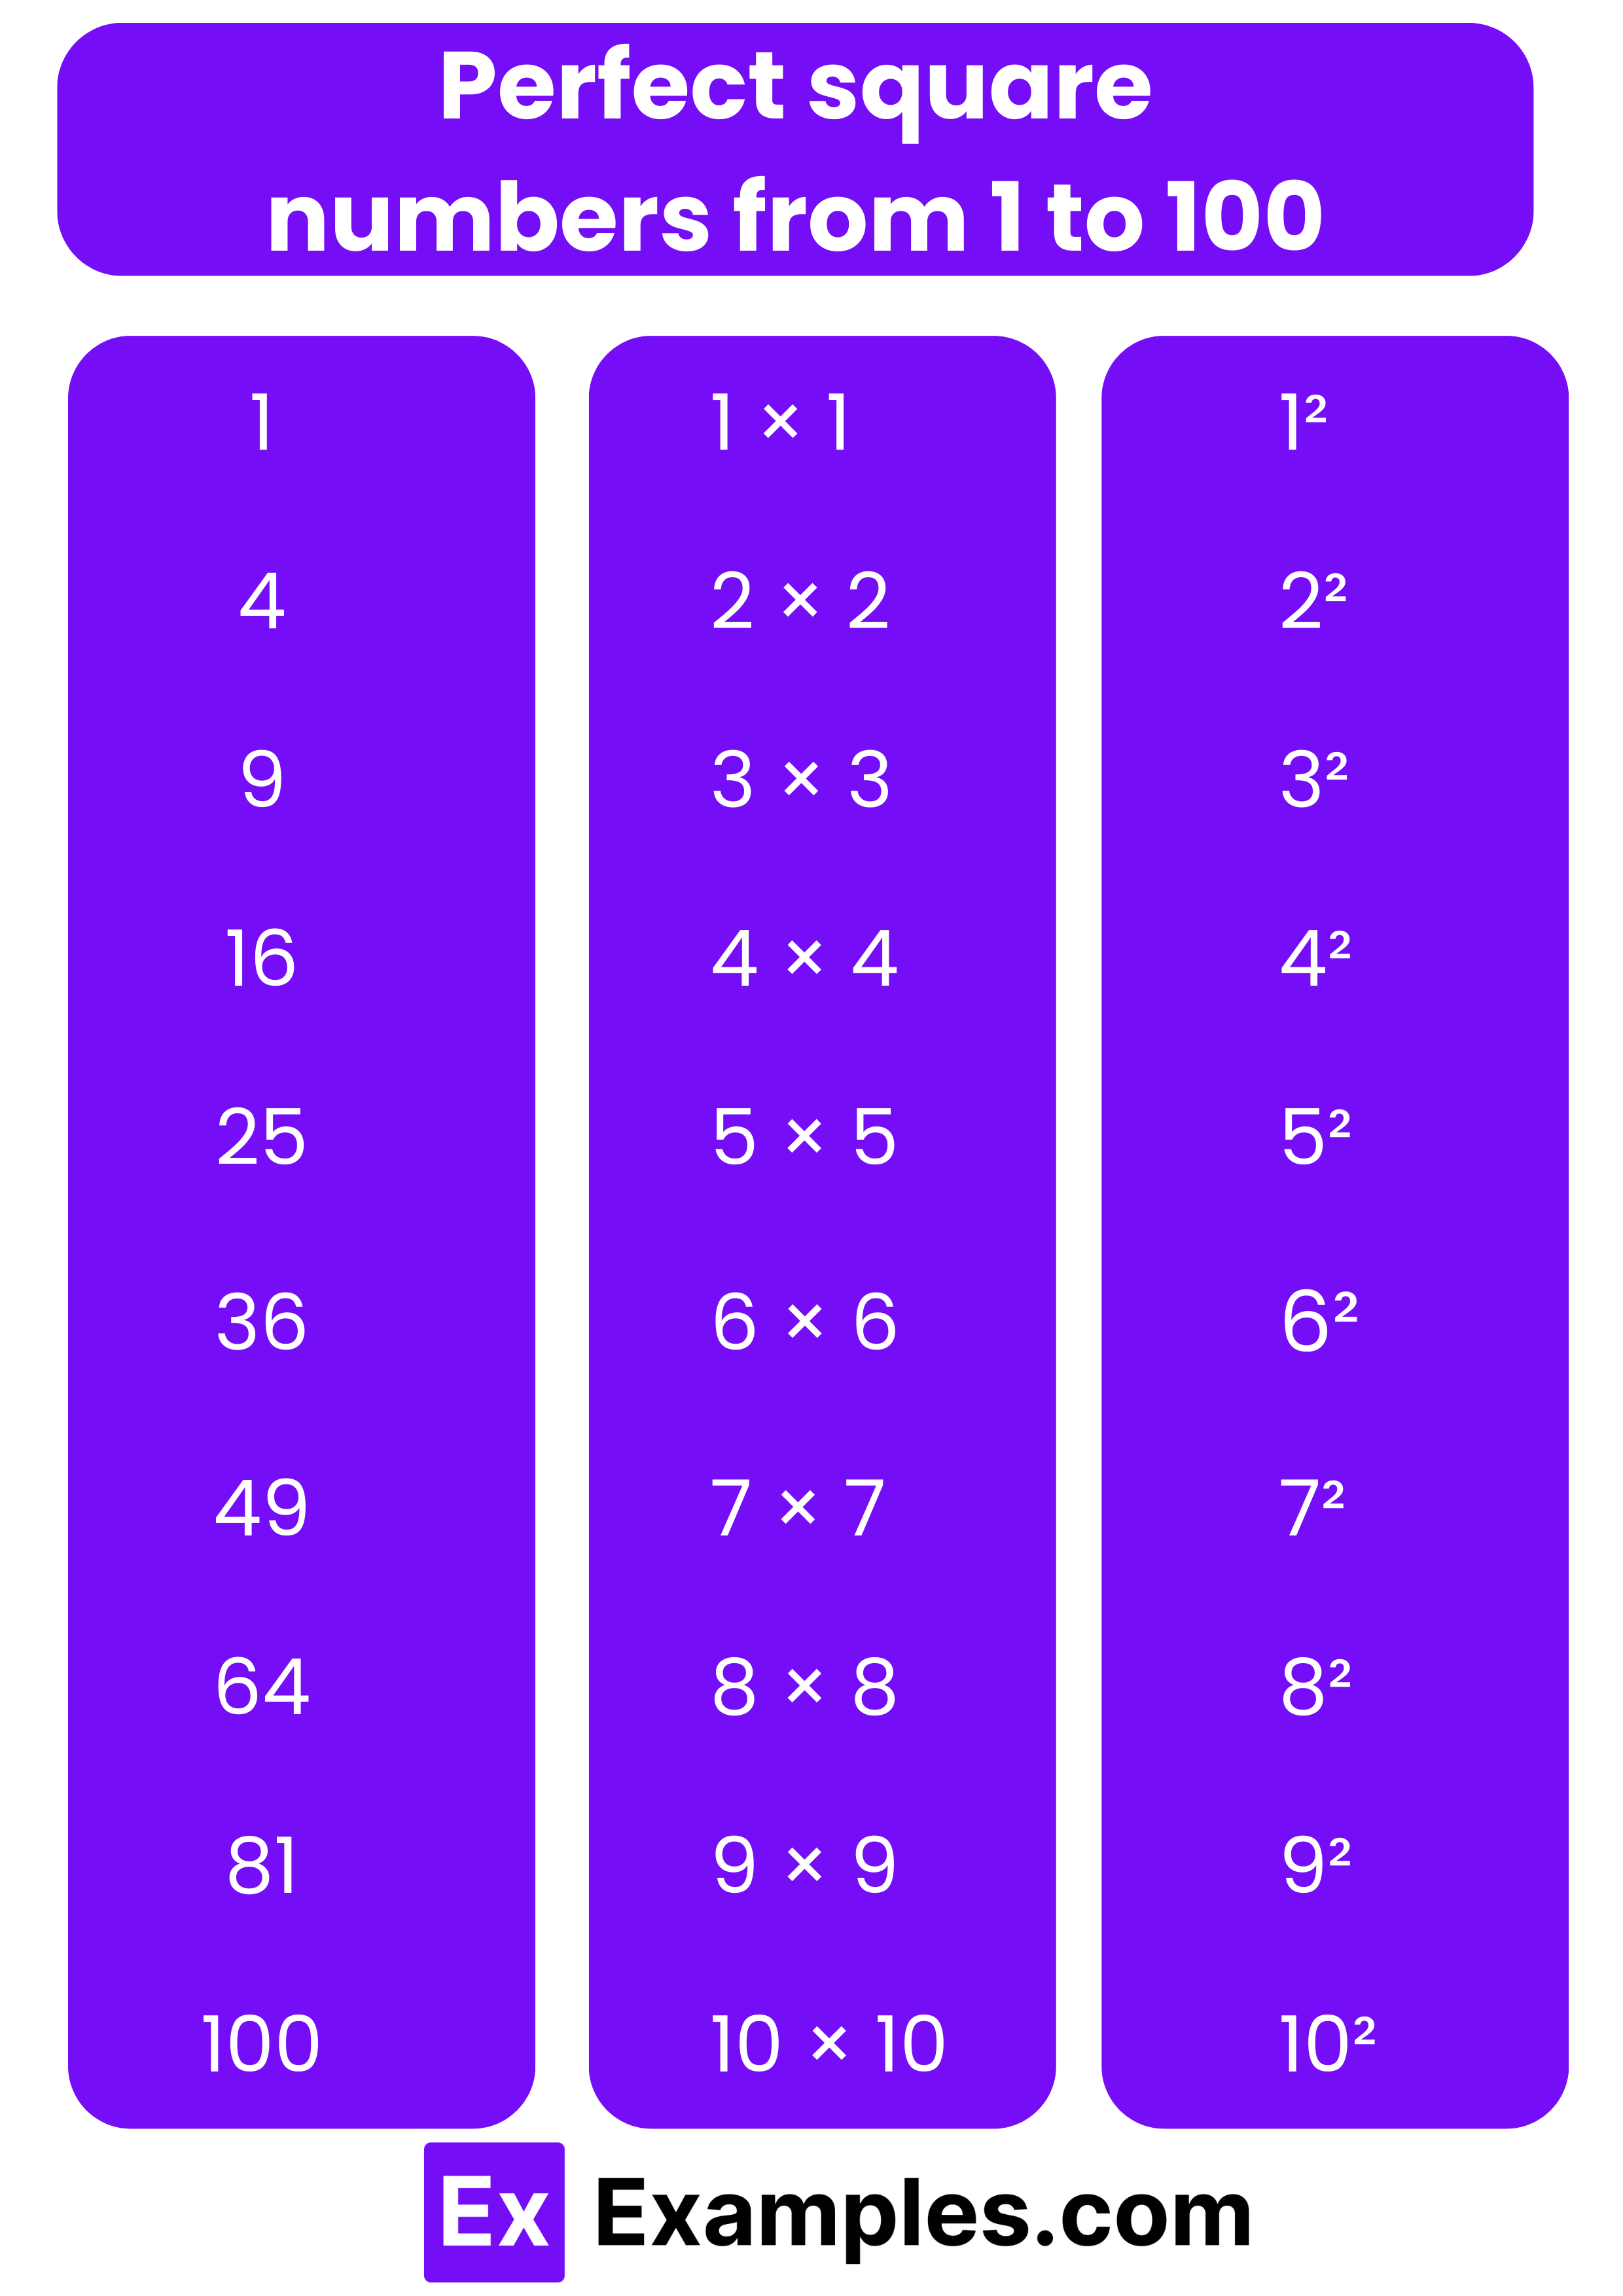 Perfect-square-numbers-from-1-to-100